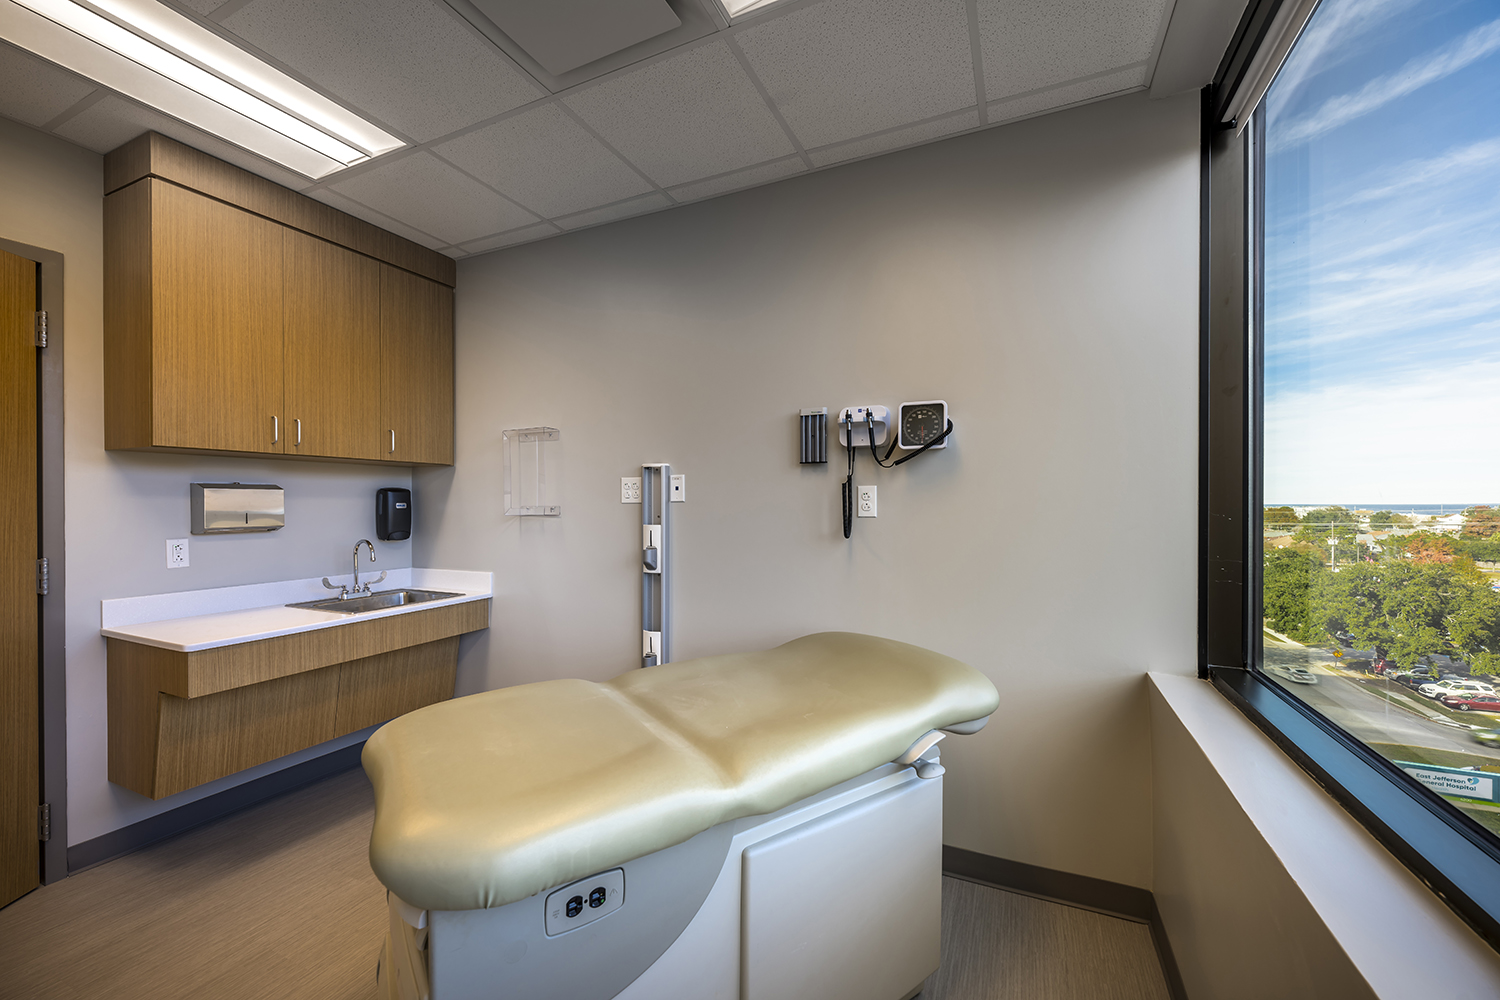 Cardiology Exam Room construction by The McDonnel Group